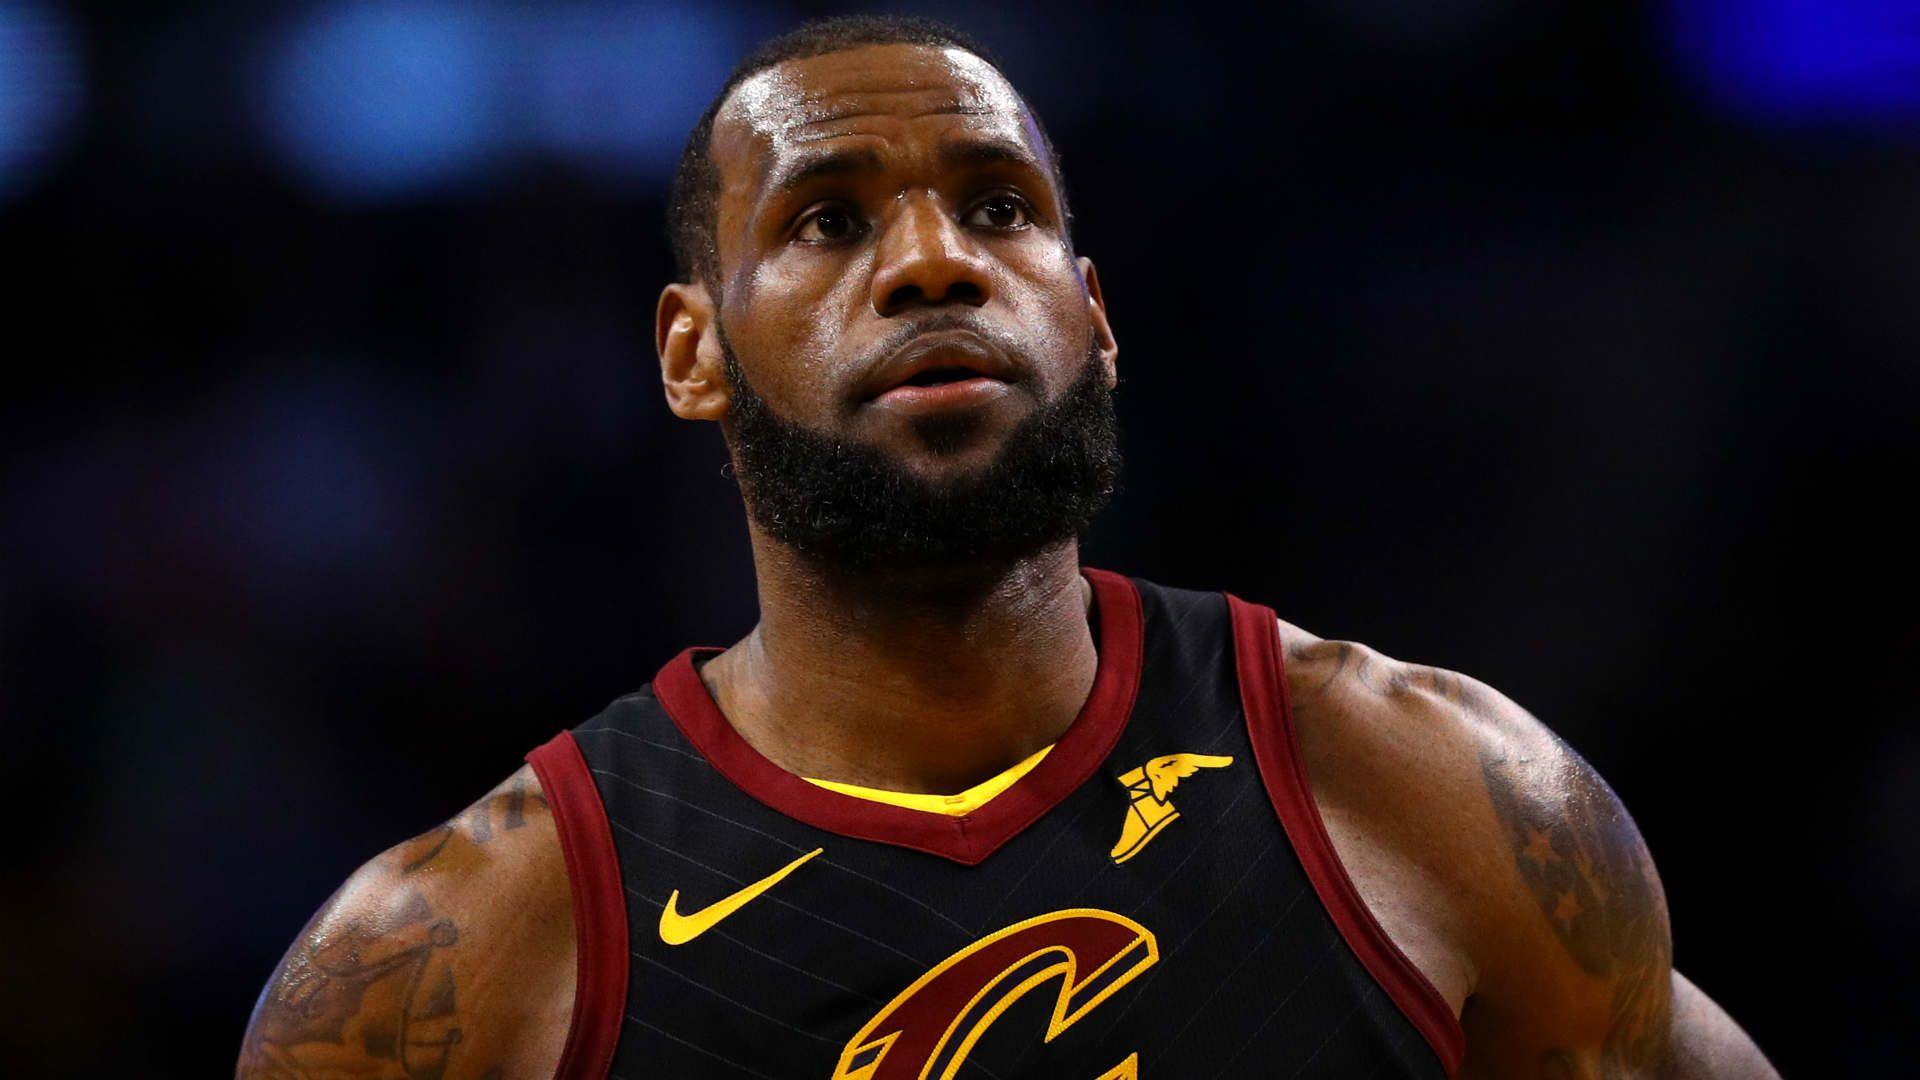 LeBron James on playoff outlook: 'We could easily get bounced